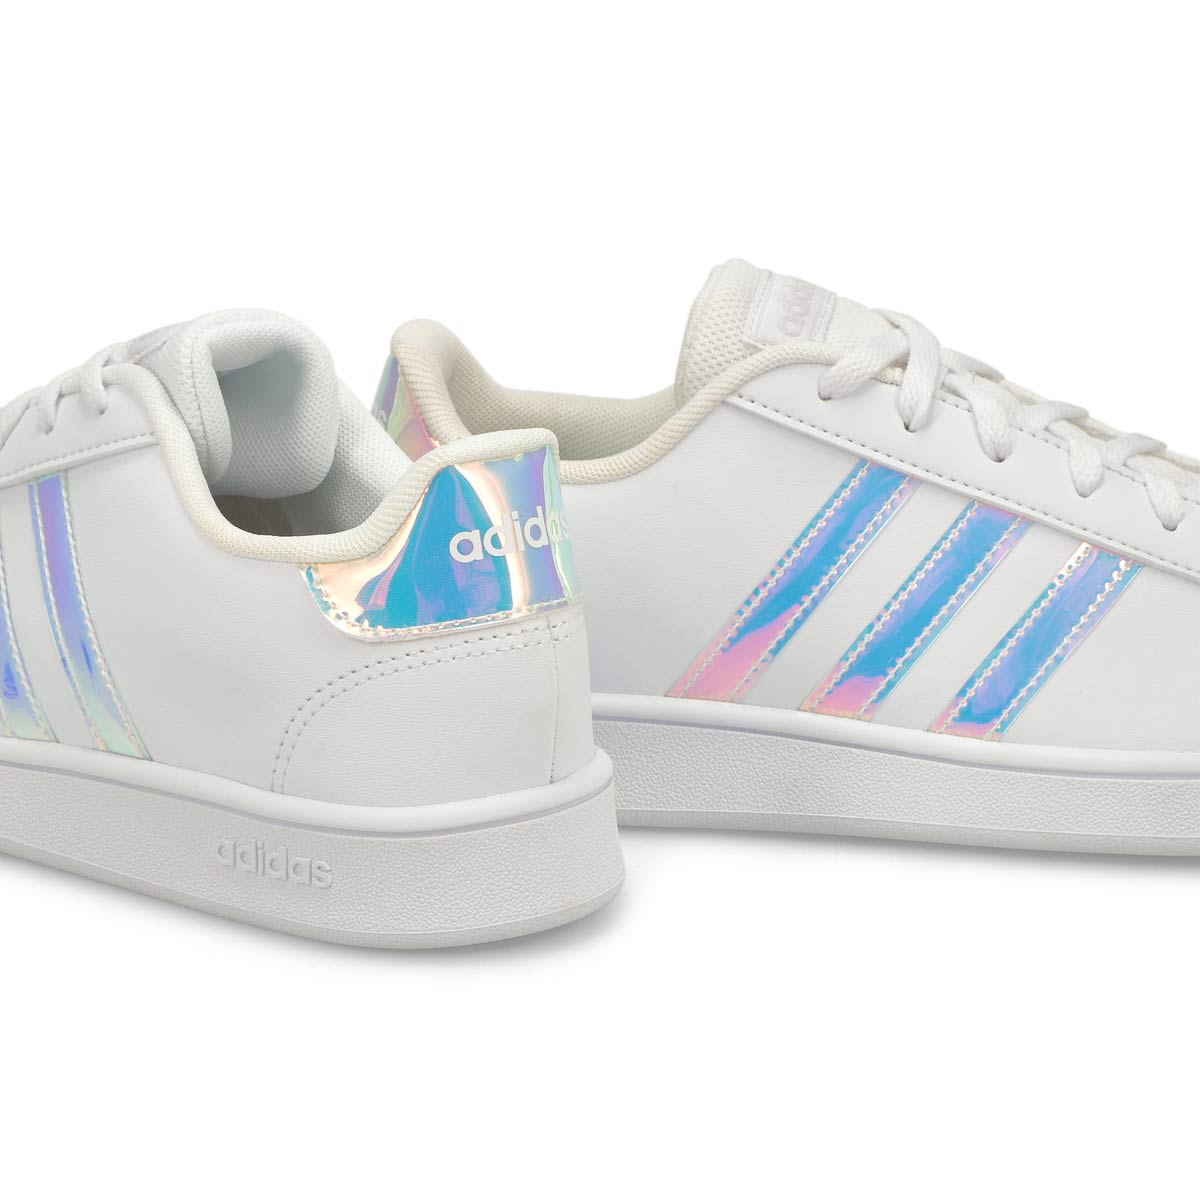 Kids' GRAND COURT white/blue sneakers